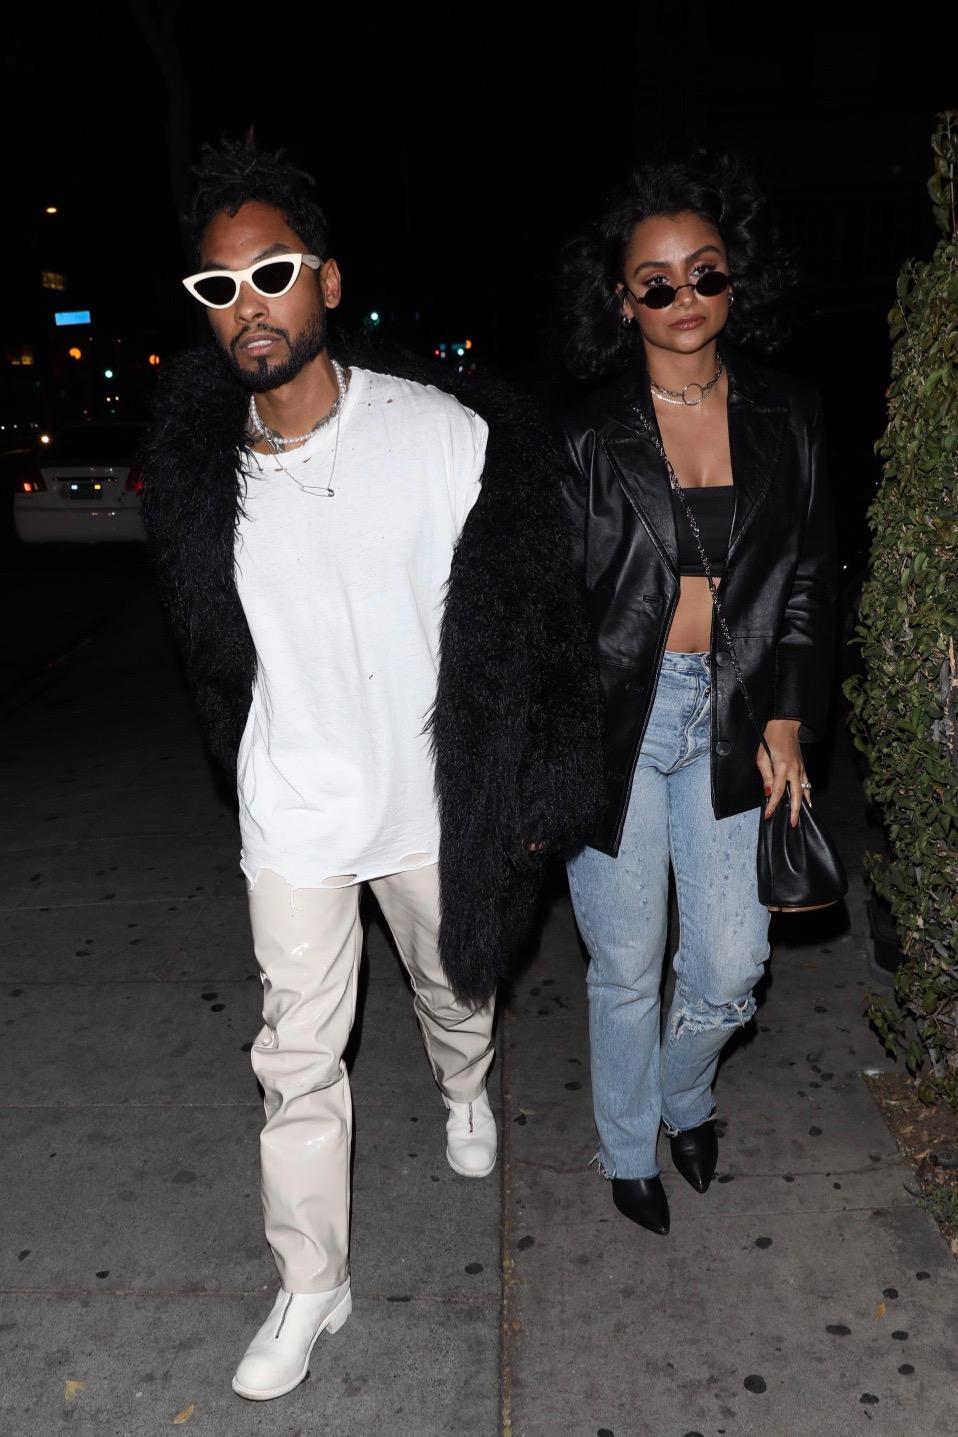 Singer Miguel and his wife are seen arriving to Justin Bieber birthday party